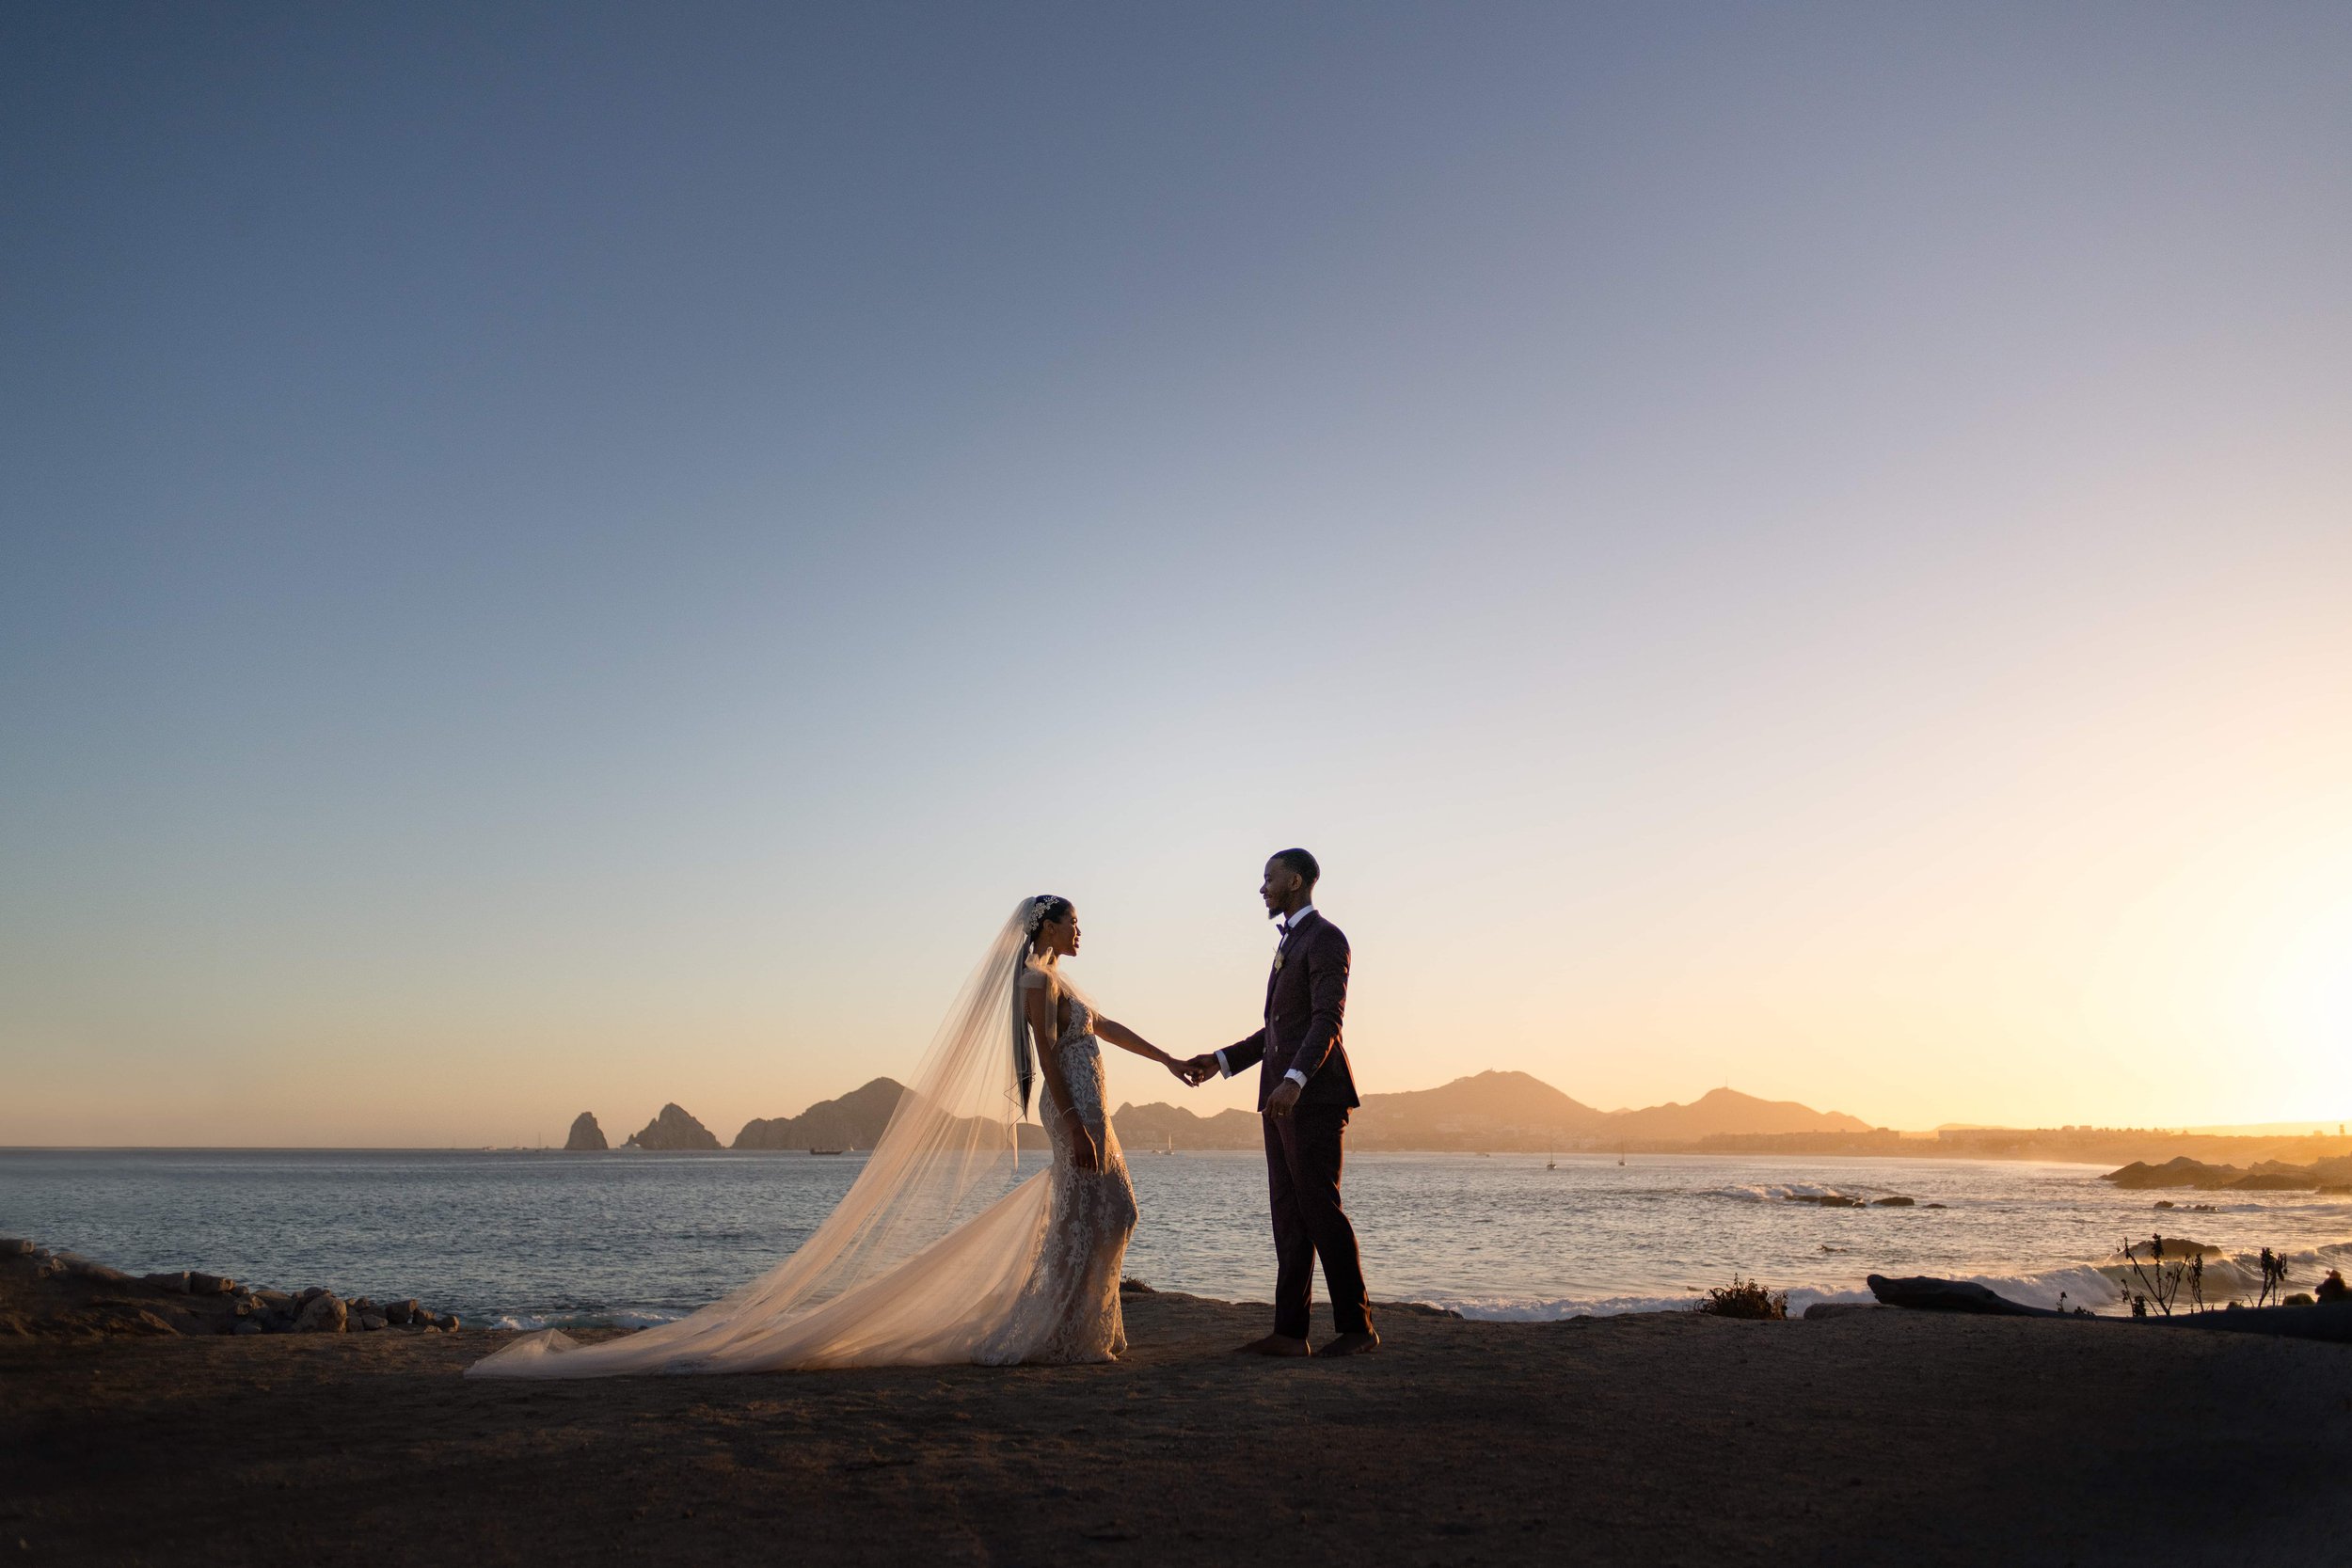  A bride and groom stand holding hands on a beach at sunset, with the bride's long veil flowing in the breeze and distant mountains and ocean in the background. 